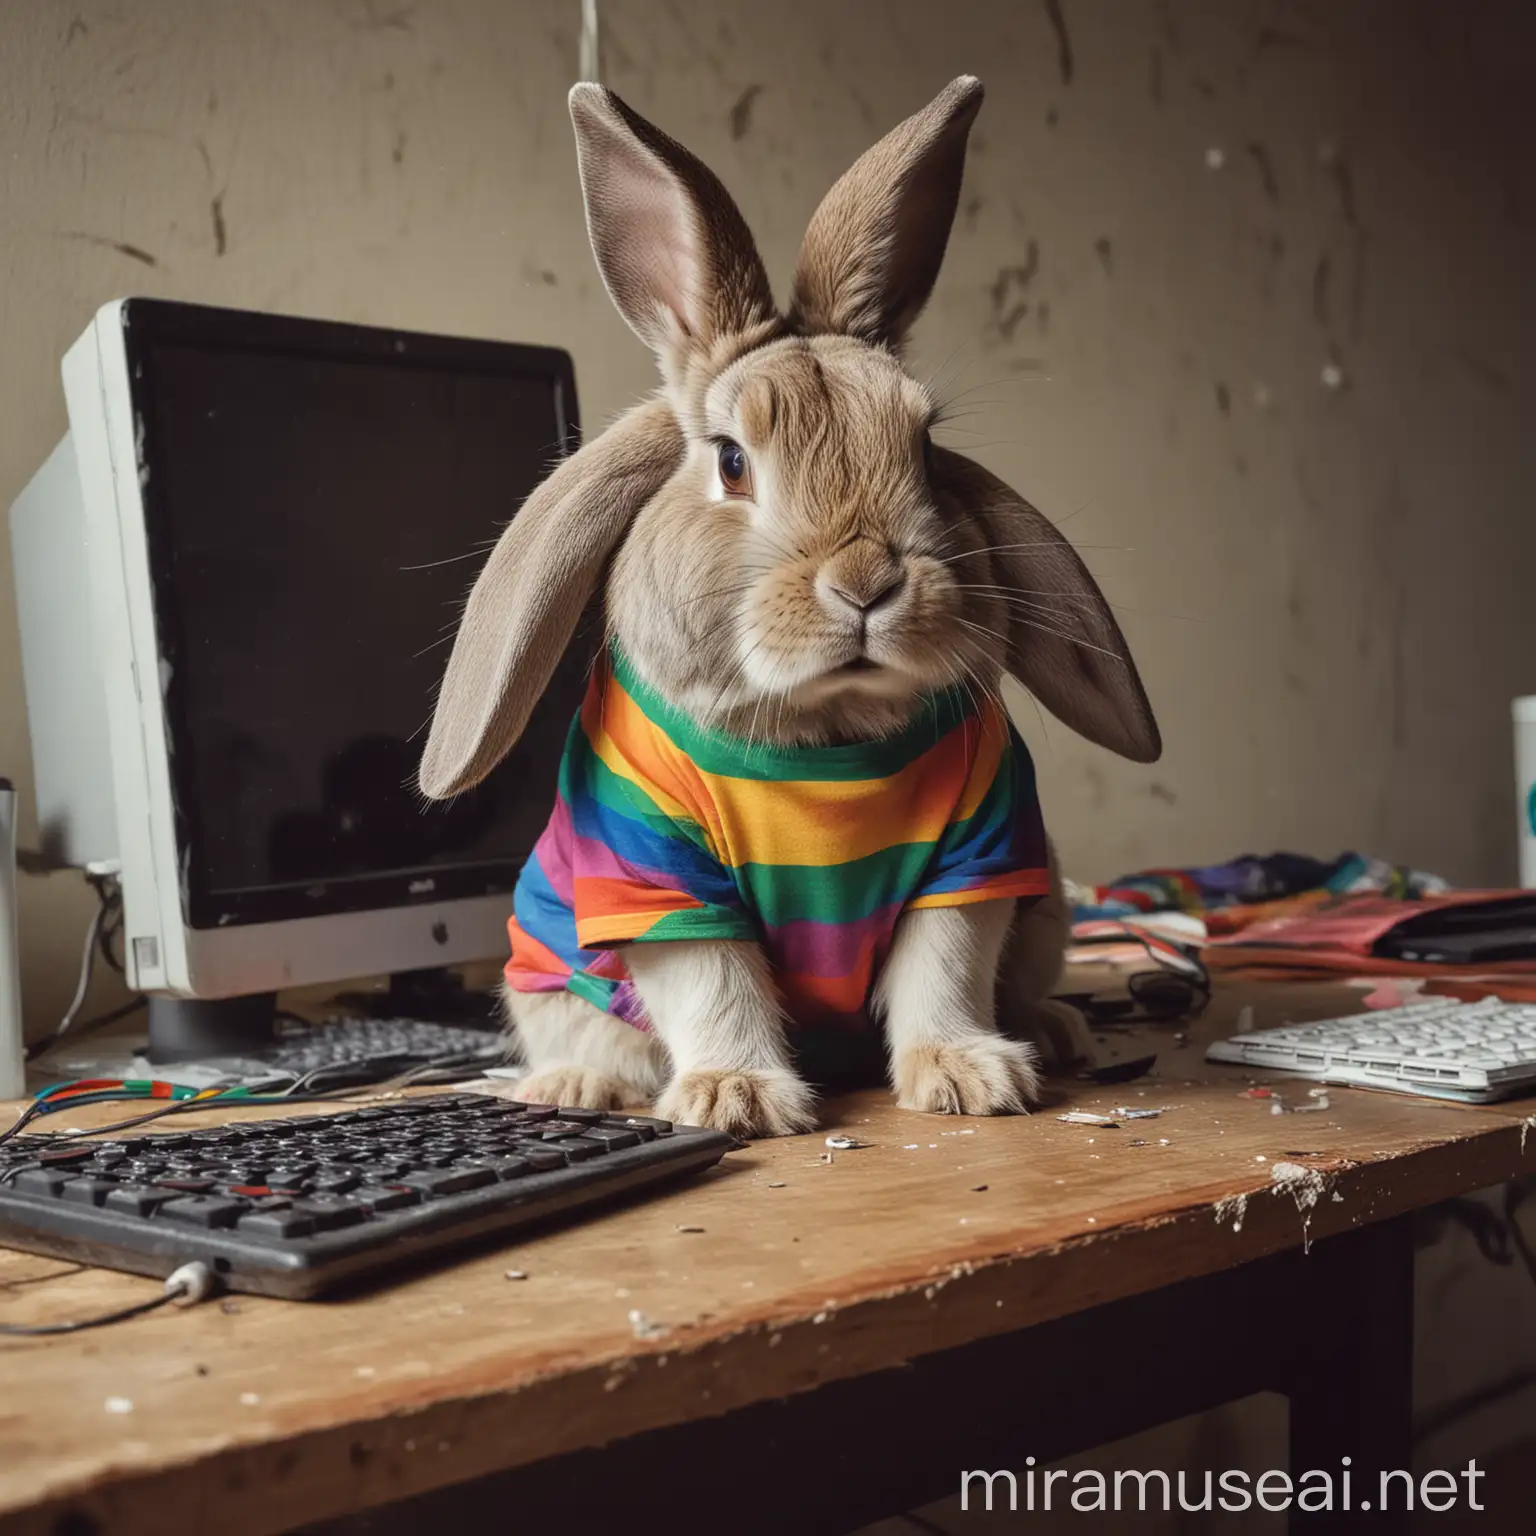 A rabbit with a rainbow shirt on sitting a a computer desk in a small dirty room looking sad and stressed